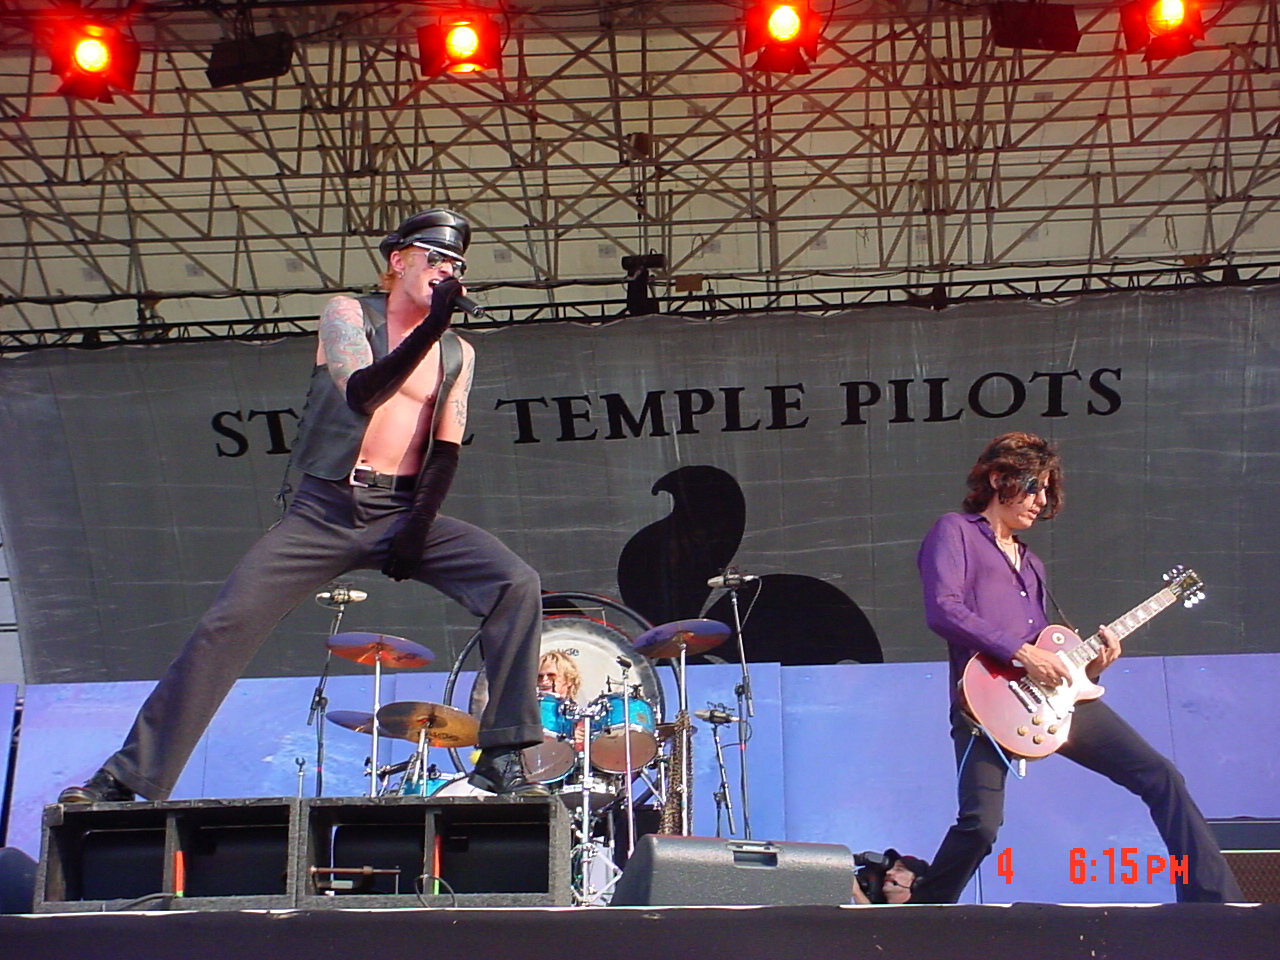 Stone Temple Pilot live at Rolling Rock 2001 - Stone Temple Pilots live at Rolling Rock Town Fair 2001 (partially lost concert footage; 2001)